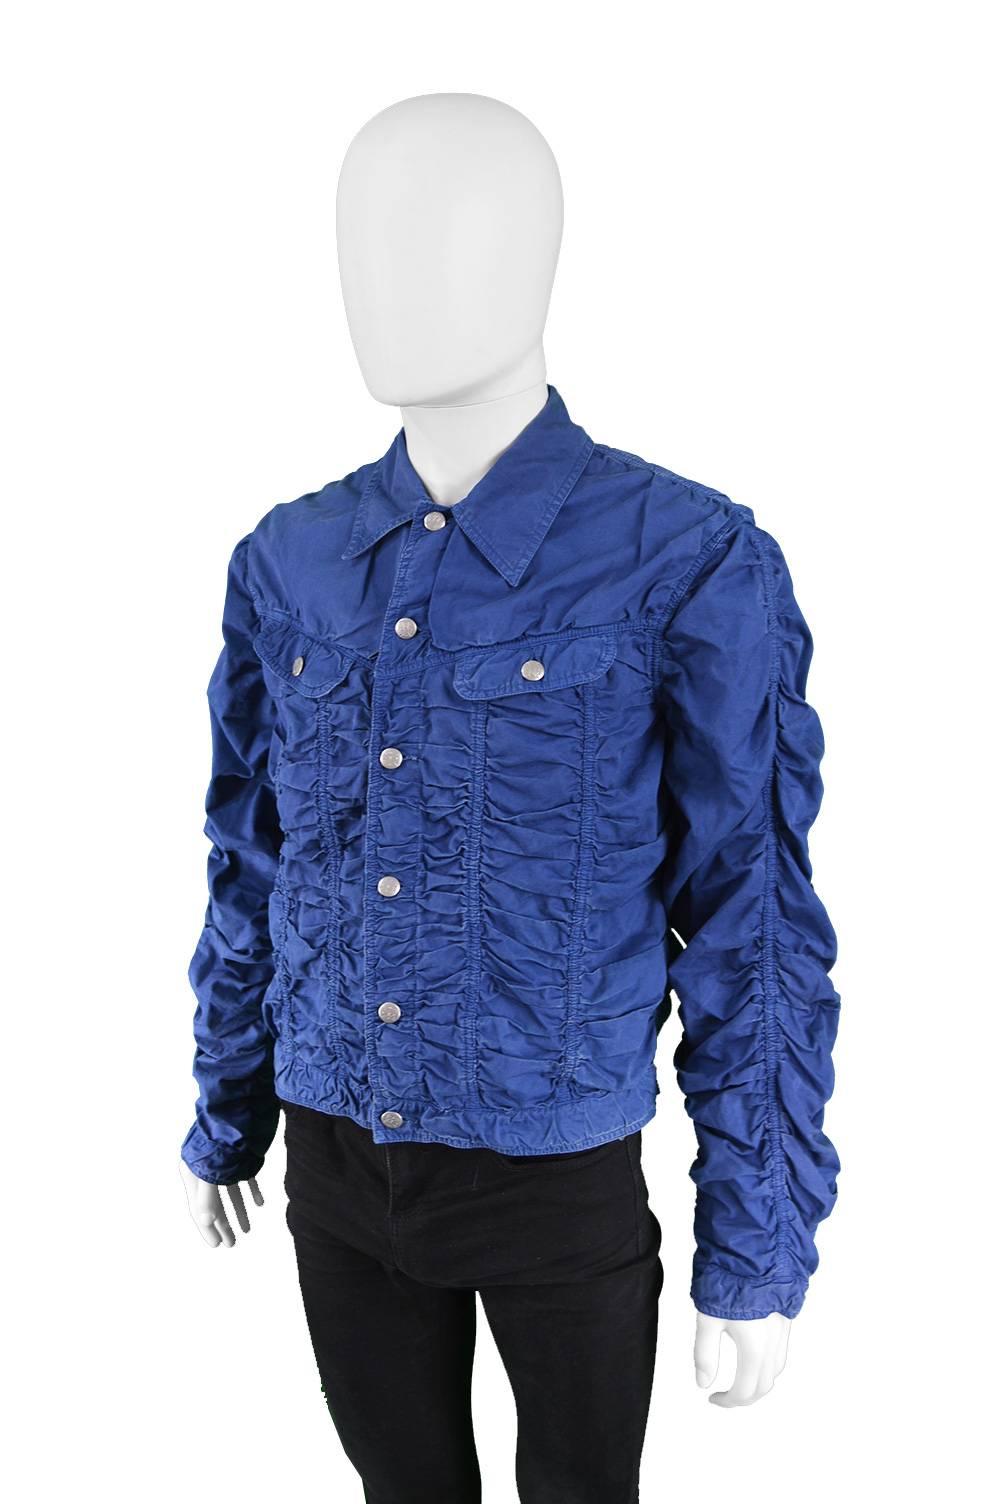 Jean Paul Gaultier Men's Vintage Ruched Blue Cotton Jacket, 1990s  In Excellent Condition For Sale In Doncaster, South Yorkshire